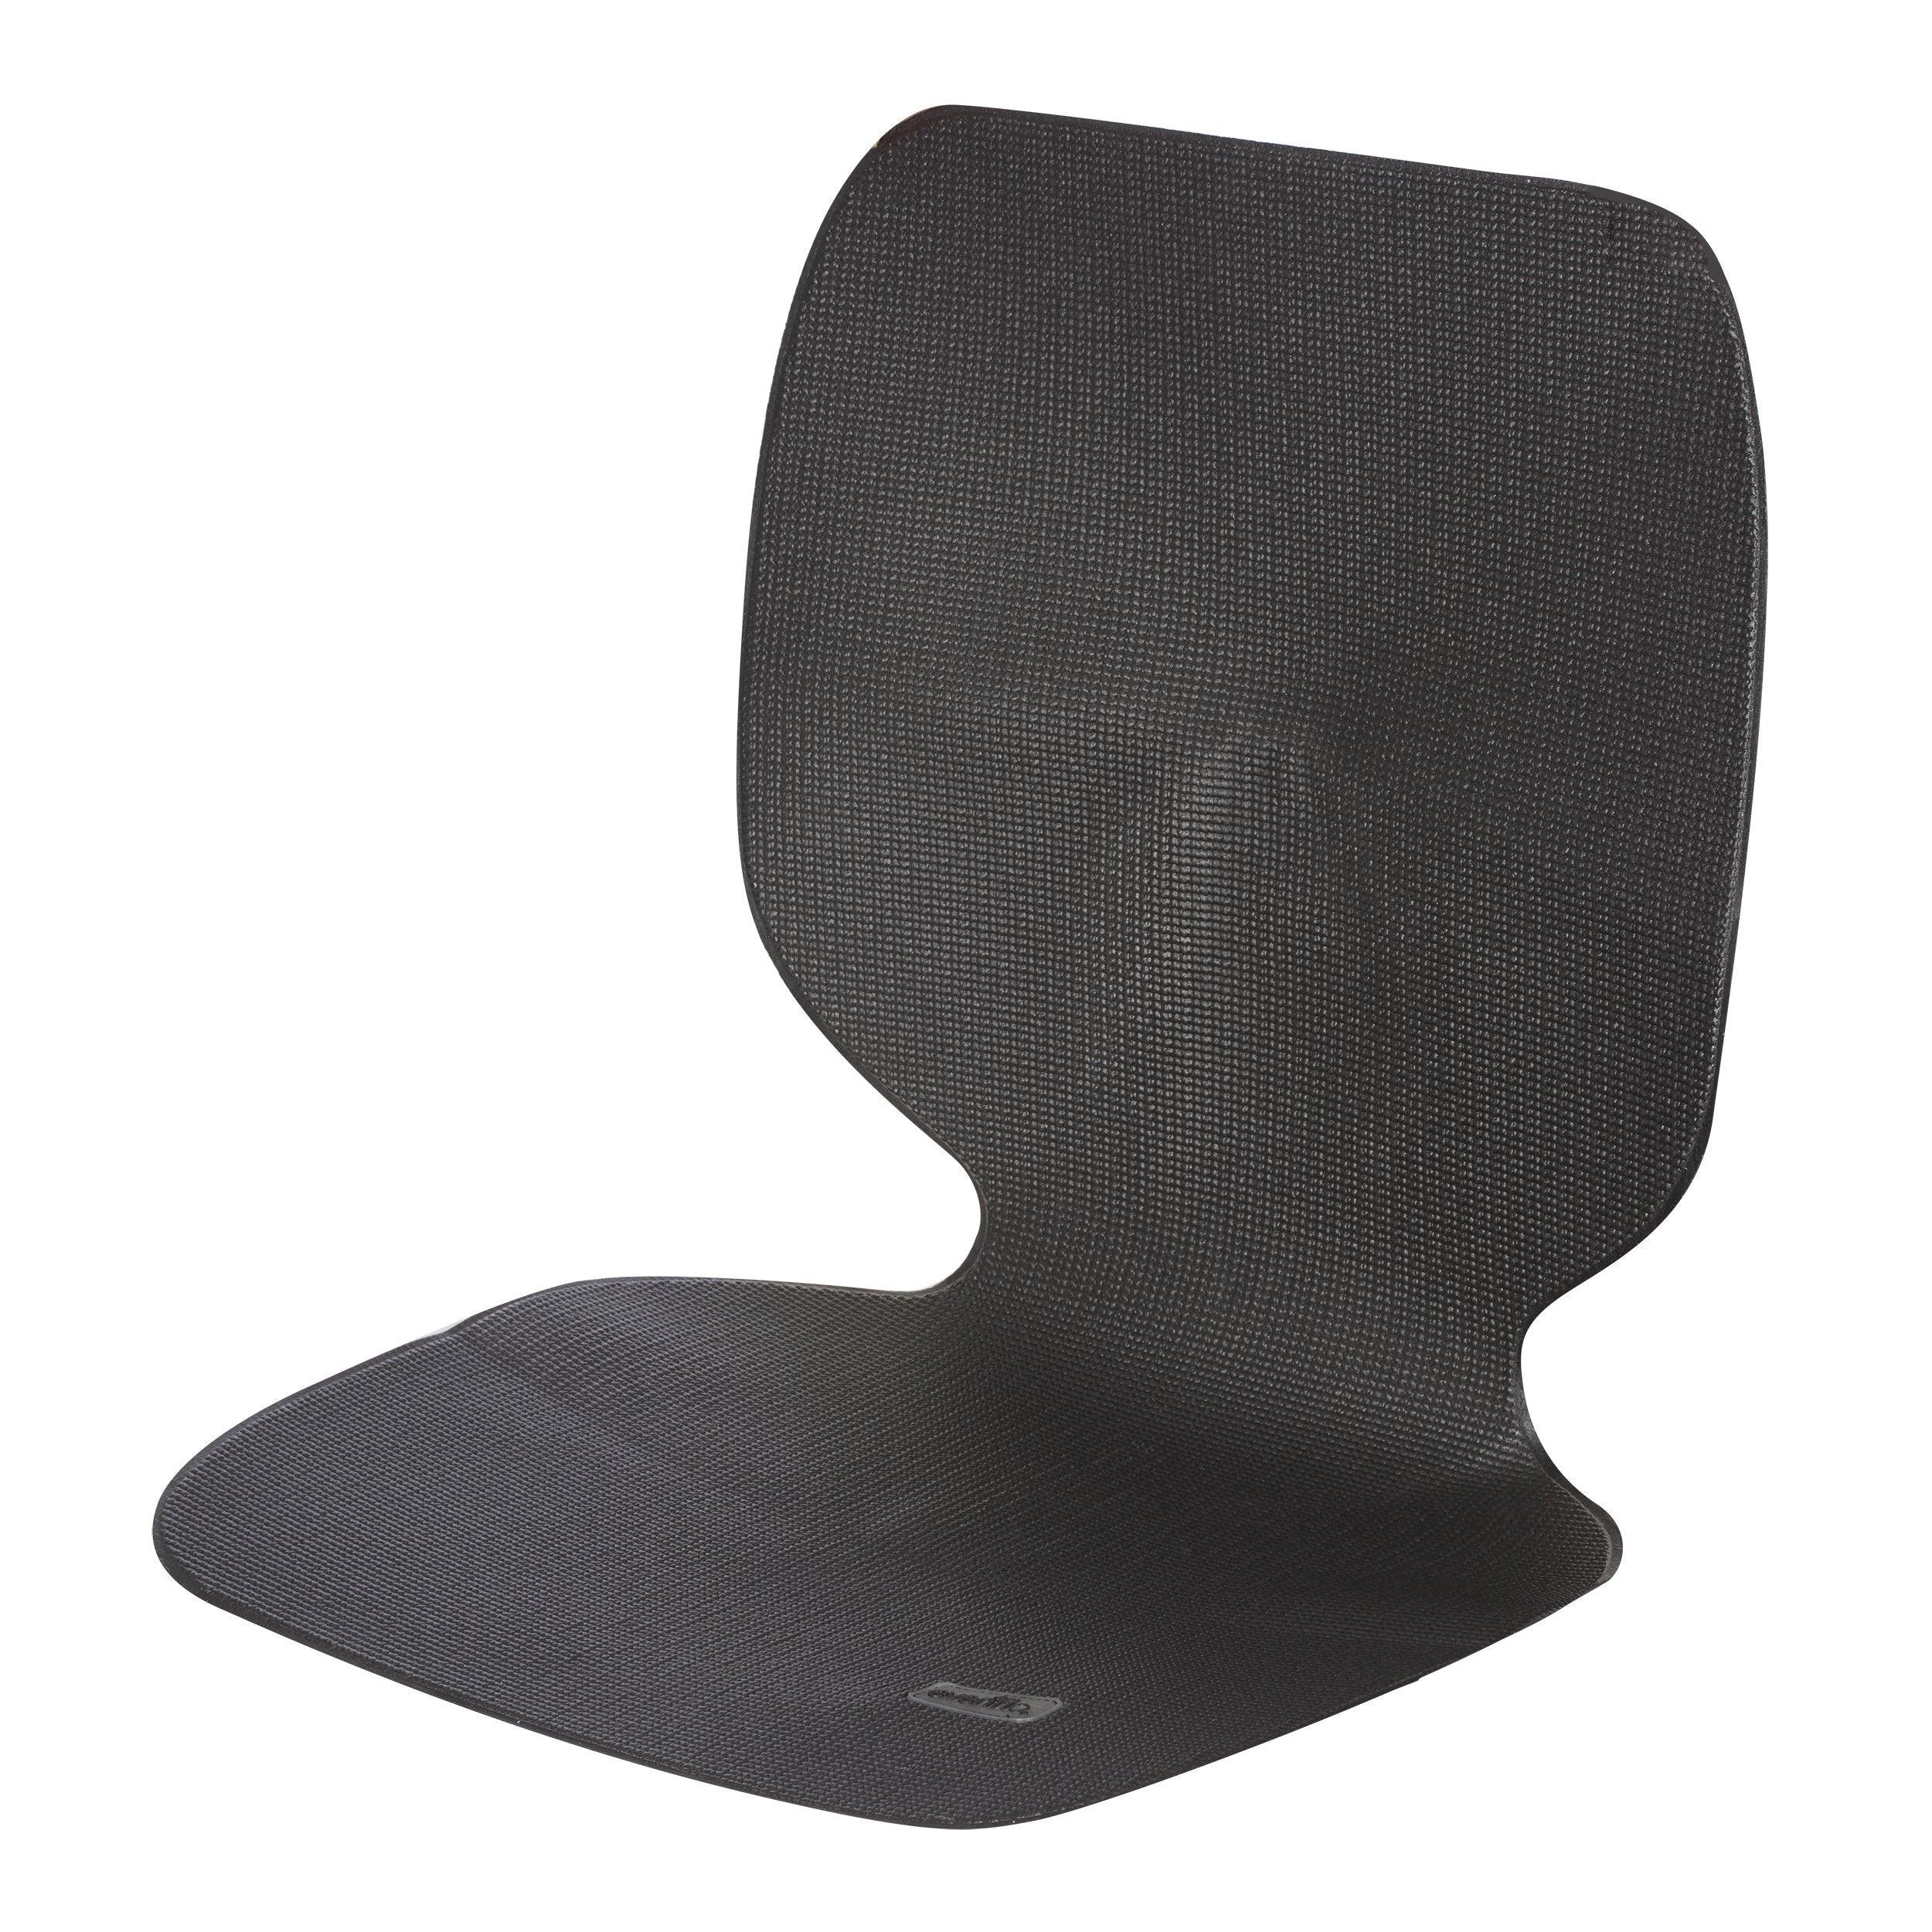 Undermat Seat Protector For Car Seats and Boosters - MacroBaby